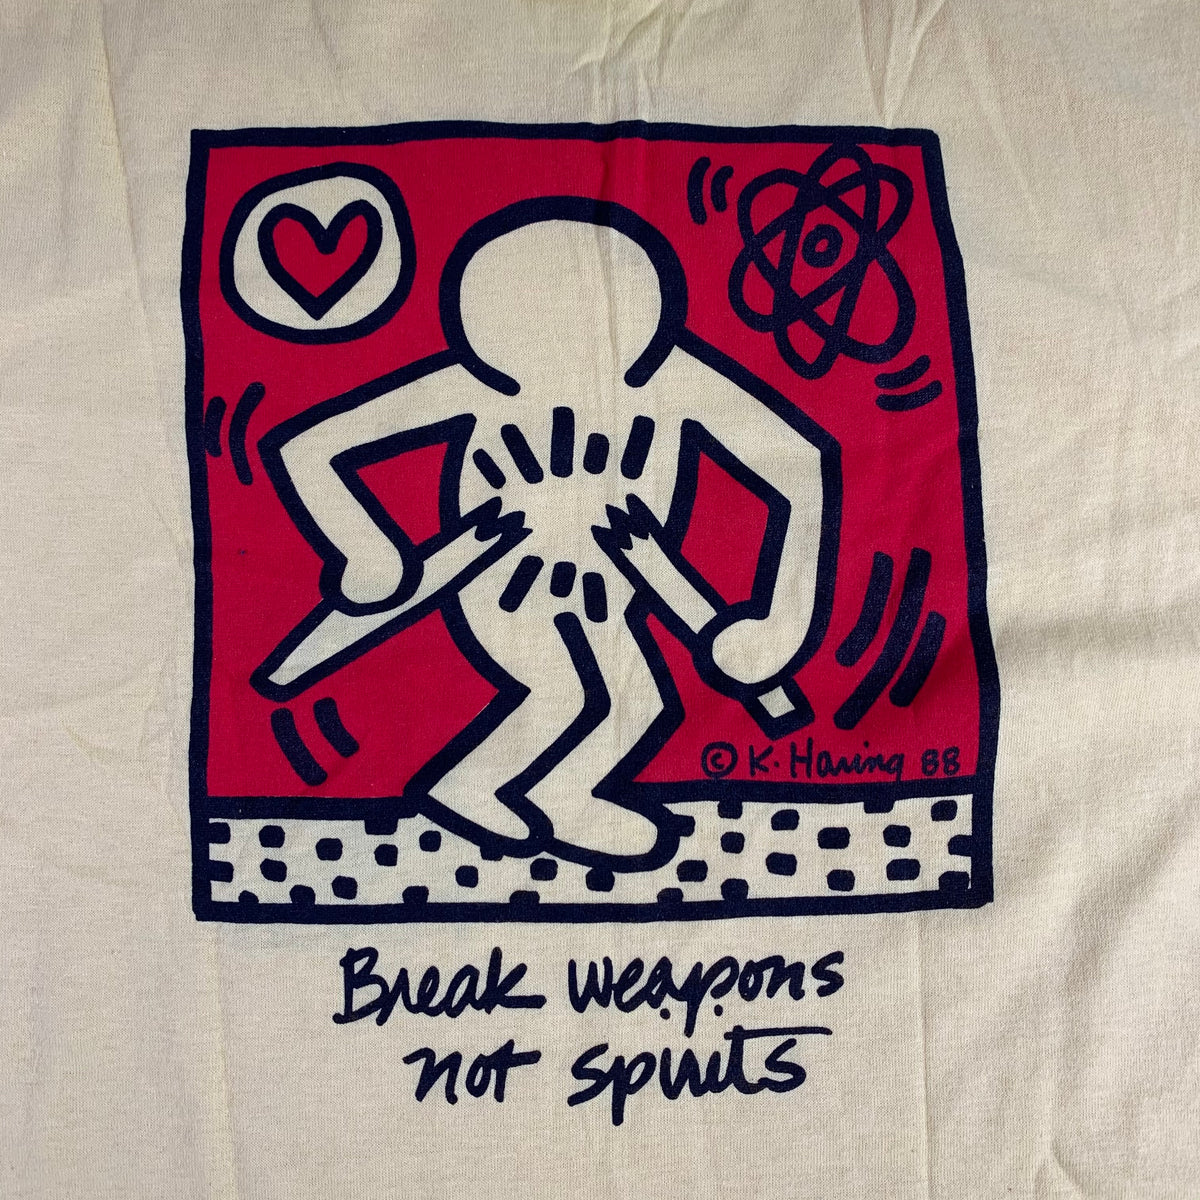 Vintage March For Peace &quot;Keith Haring&quot; Break Weapons Not Spirits T-Shirt